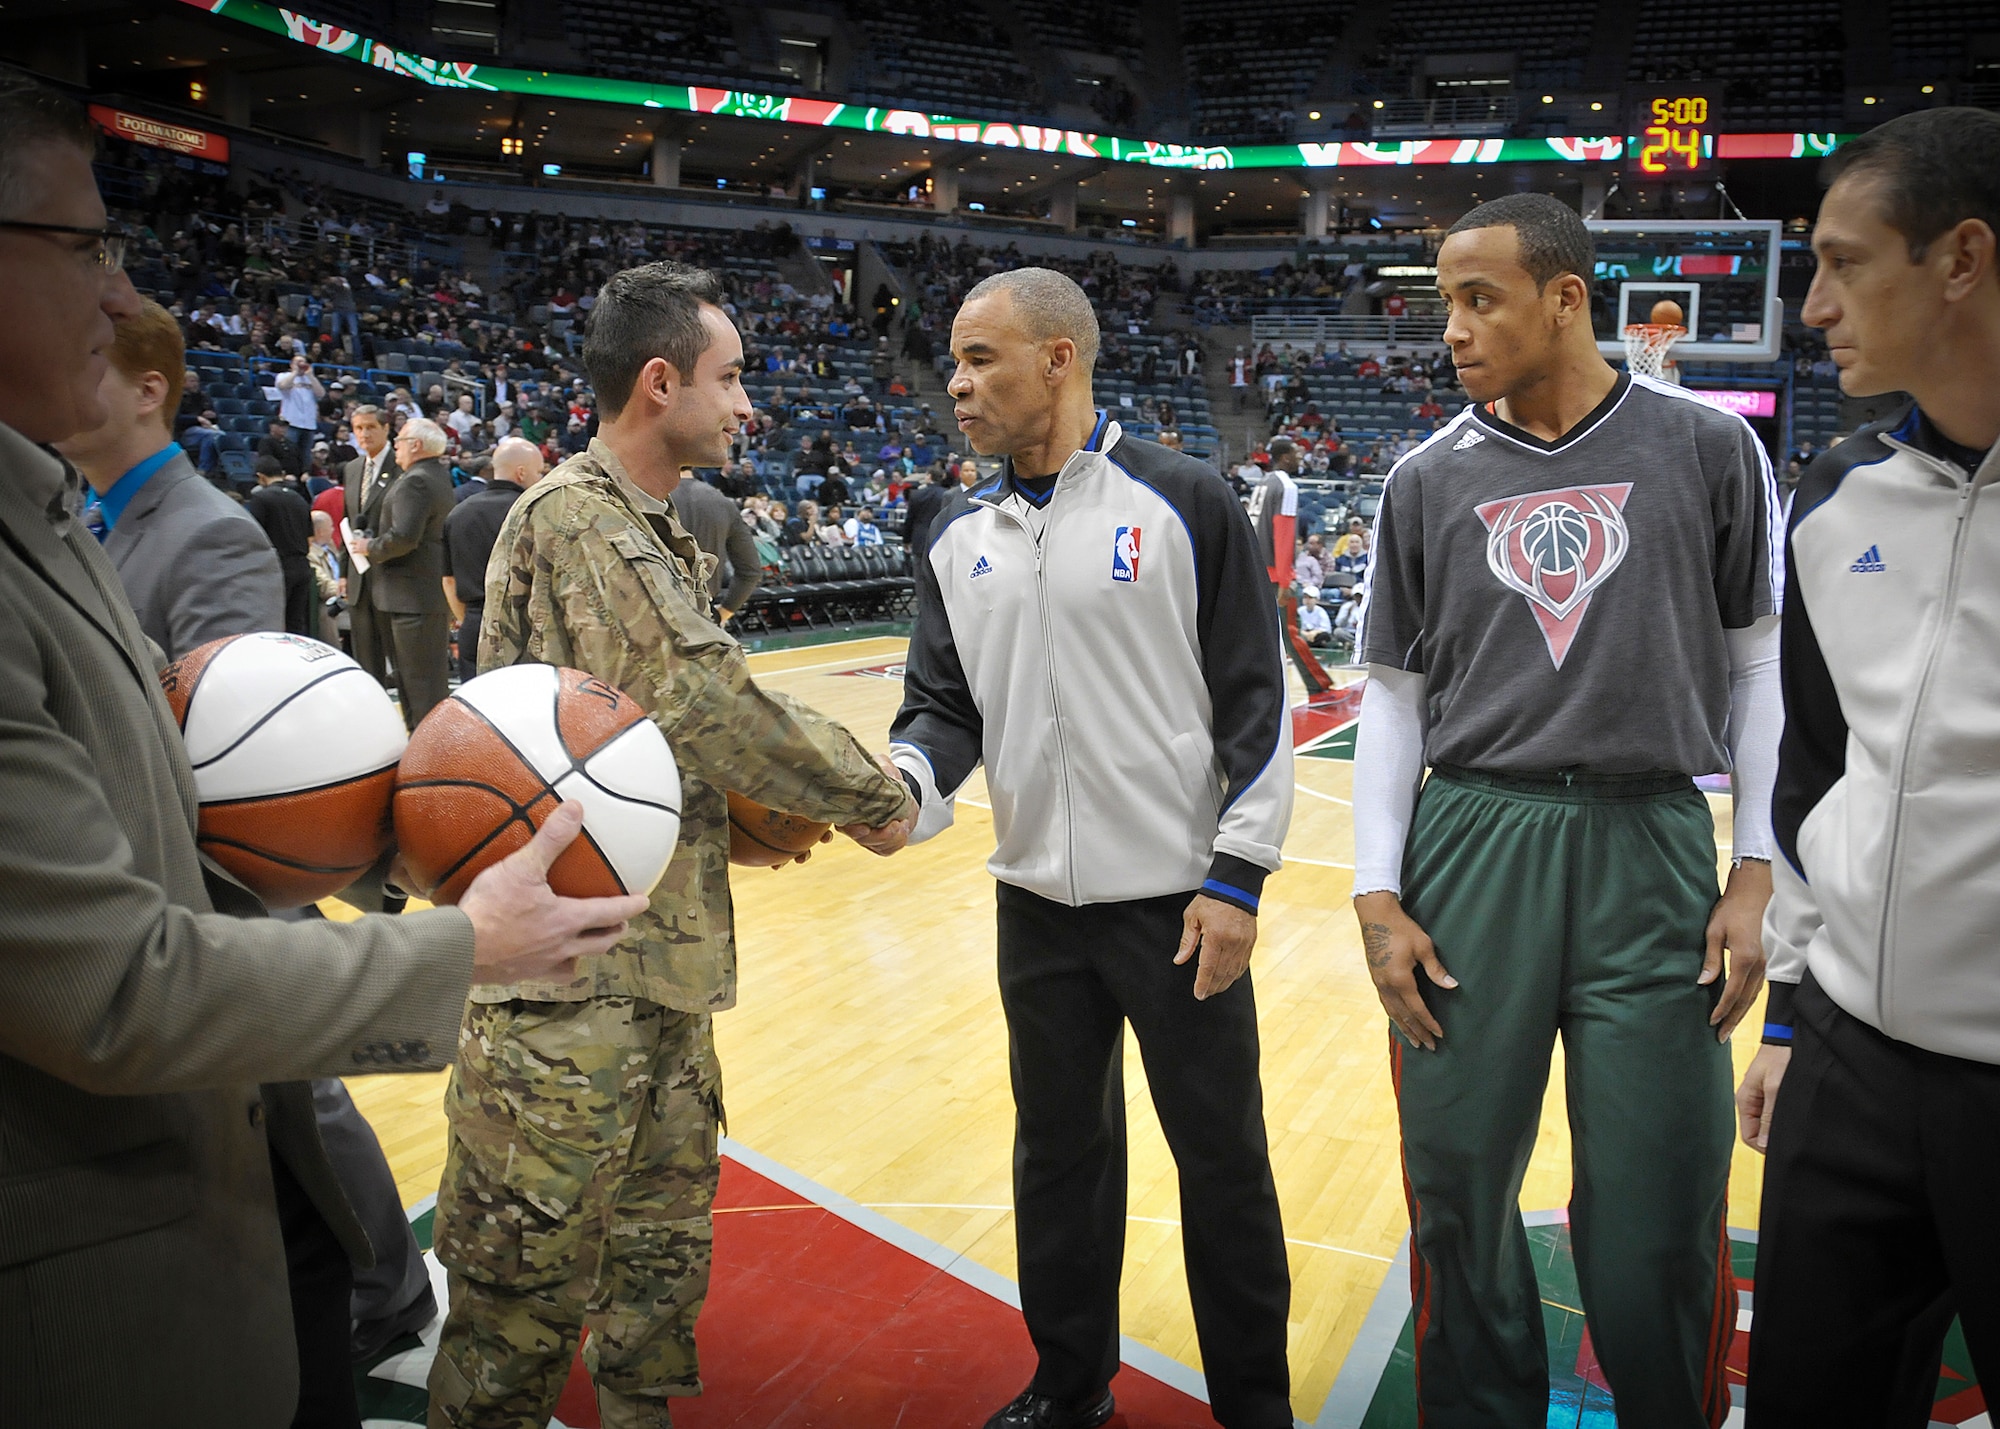 Senior Airman Jefferson Harkleroad, an Air Force electrician serving in the Civil Engineering Squadron at Milwaukee’s 128th Air Refueling Wing, shakes hands with an NBA referee at center court of the BMO Harris Bradley Center in Milwaukee Wed., April 3, 2013. 
Harkleroad, who had recently returned from a deployment to Afghanistan, was recognized prior to the Bucks game against the Minnesota Timberwolves as part of the “Hardwood Homecoming” program. (Air National Guard Photo by 1st Lt. Nathan Wallin / Released)